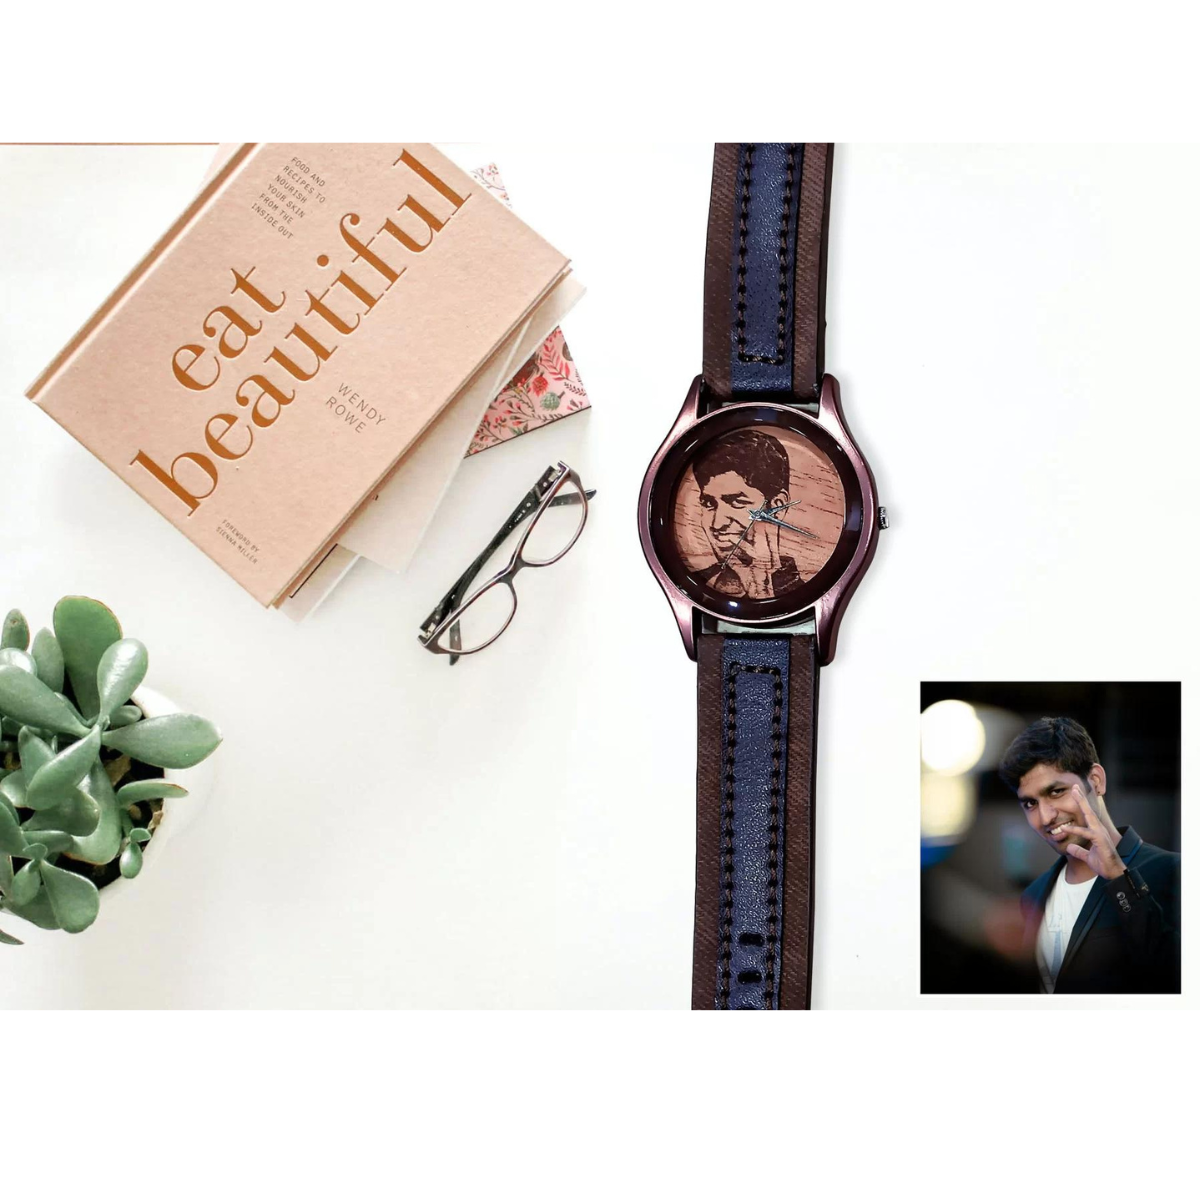 Personalized Engraved Stylish Photo Wrist Watch For Boys or Man